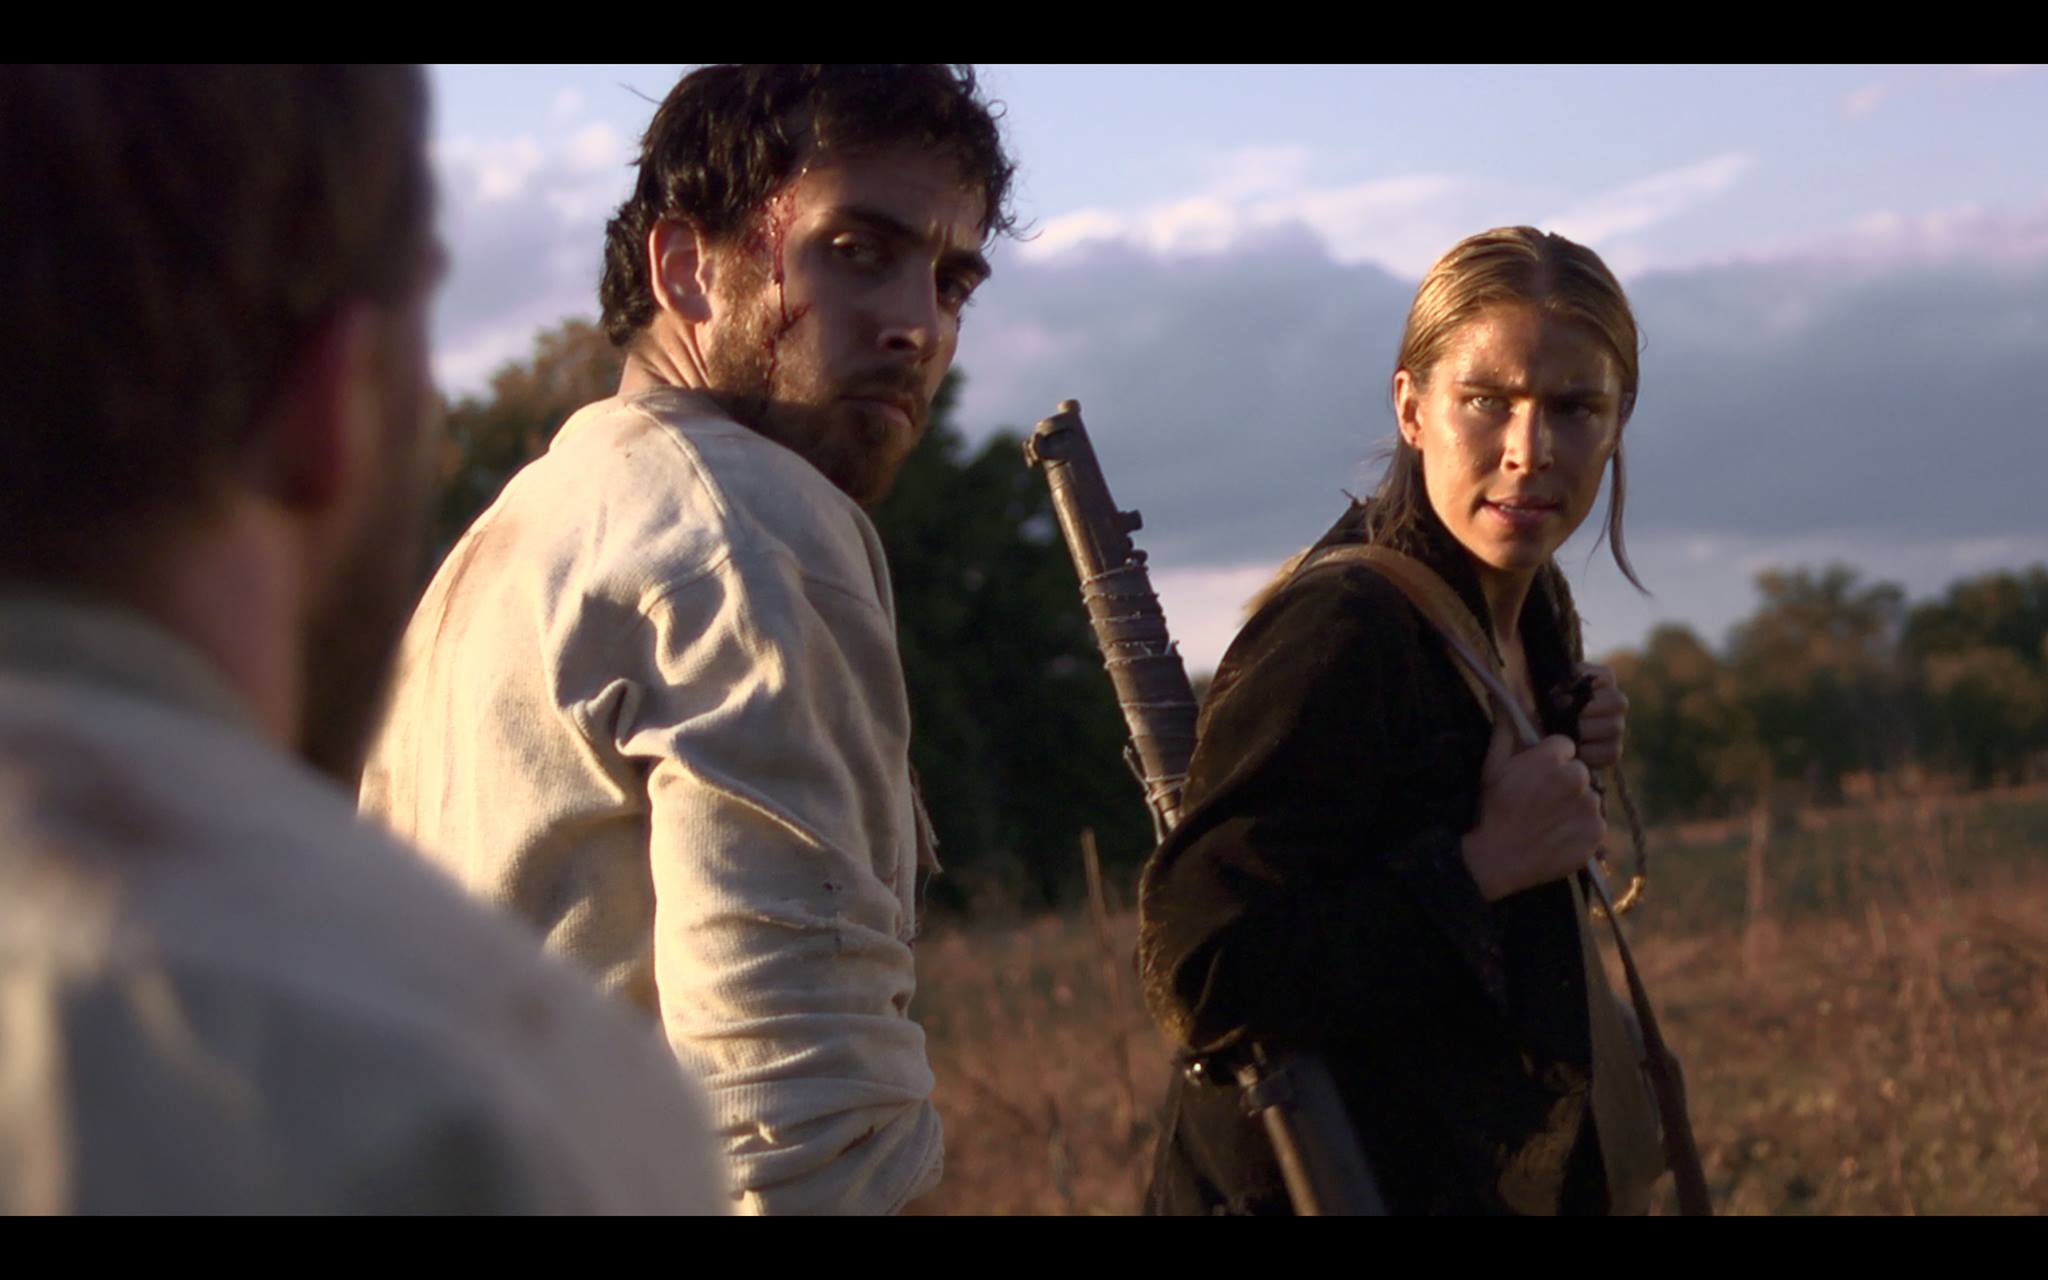 Alexandra Turshen with Clayton Stocker Myers in Blood Trail